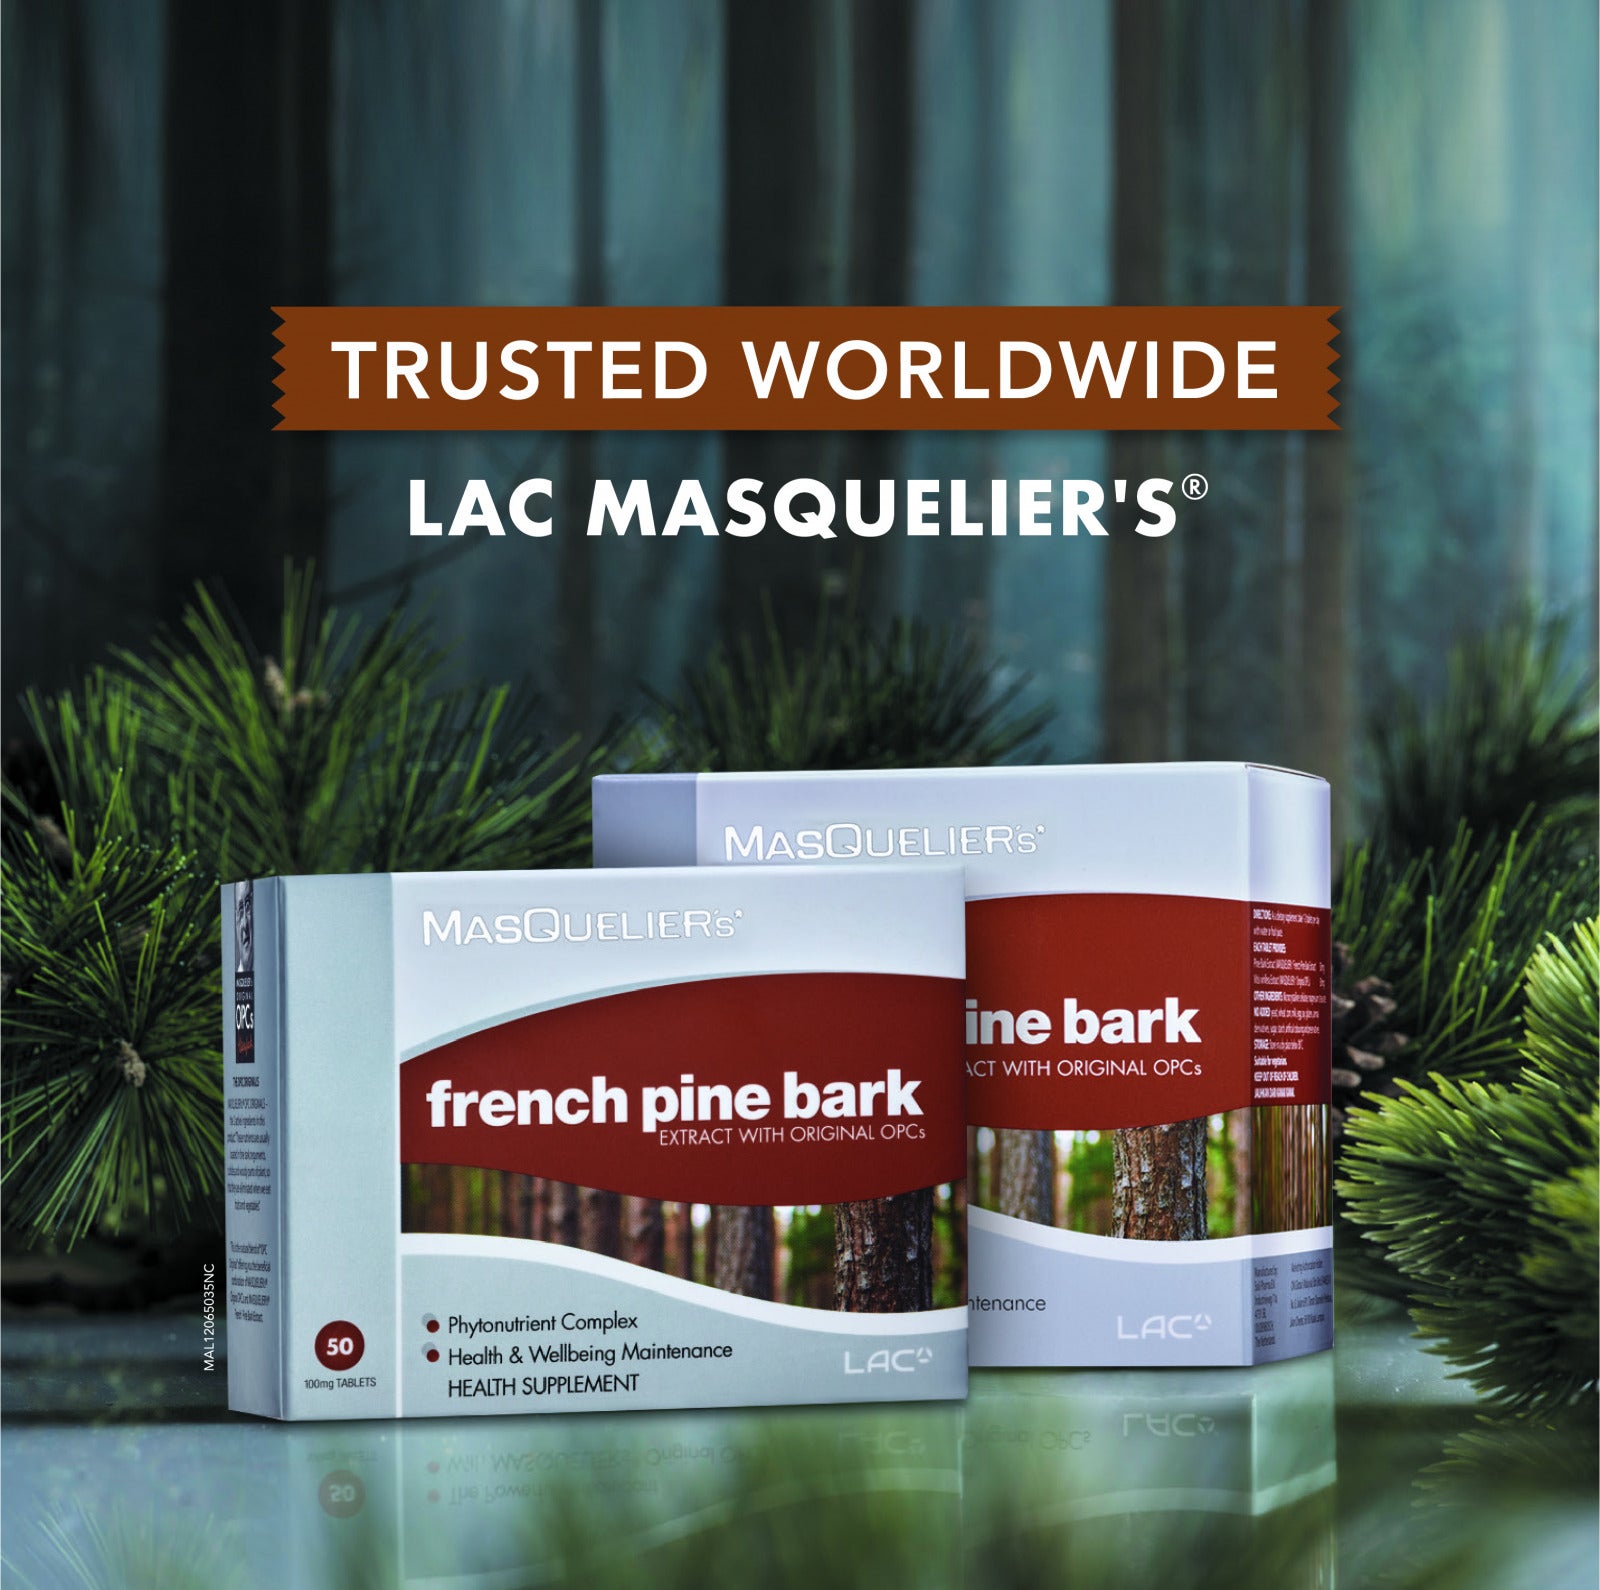 LAC MASQUELIER S® French Pine Bark Extract 100mg 50 tablets